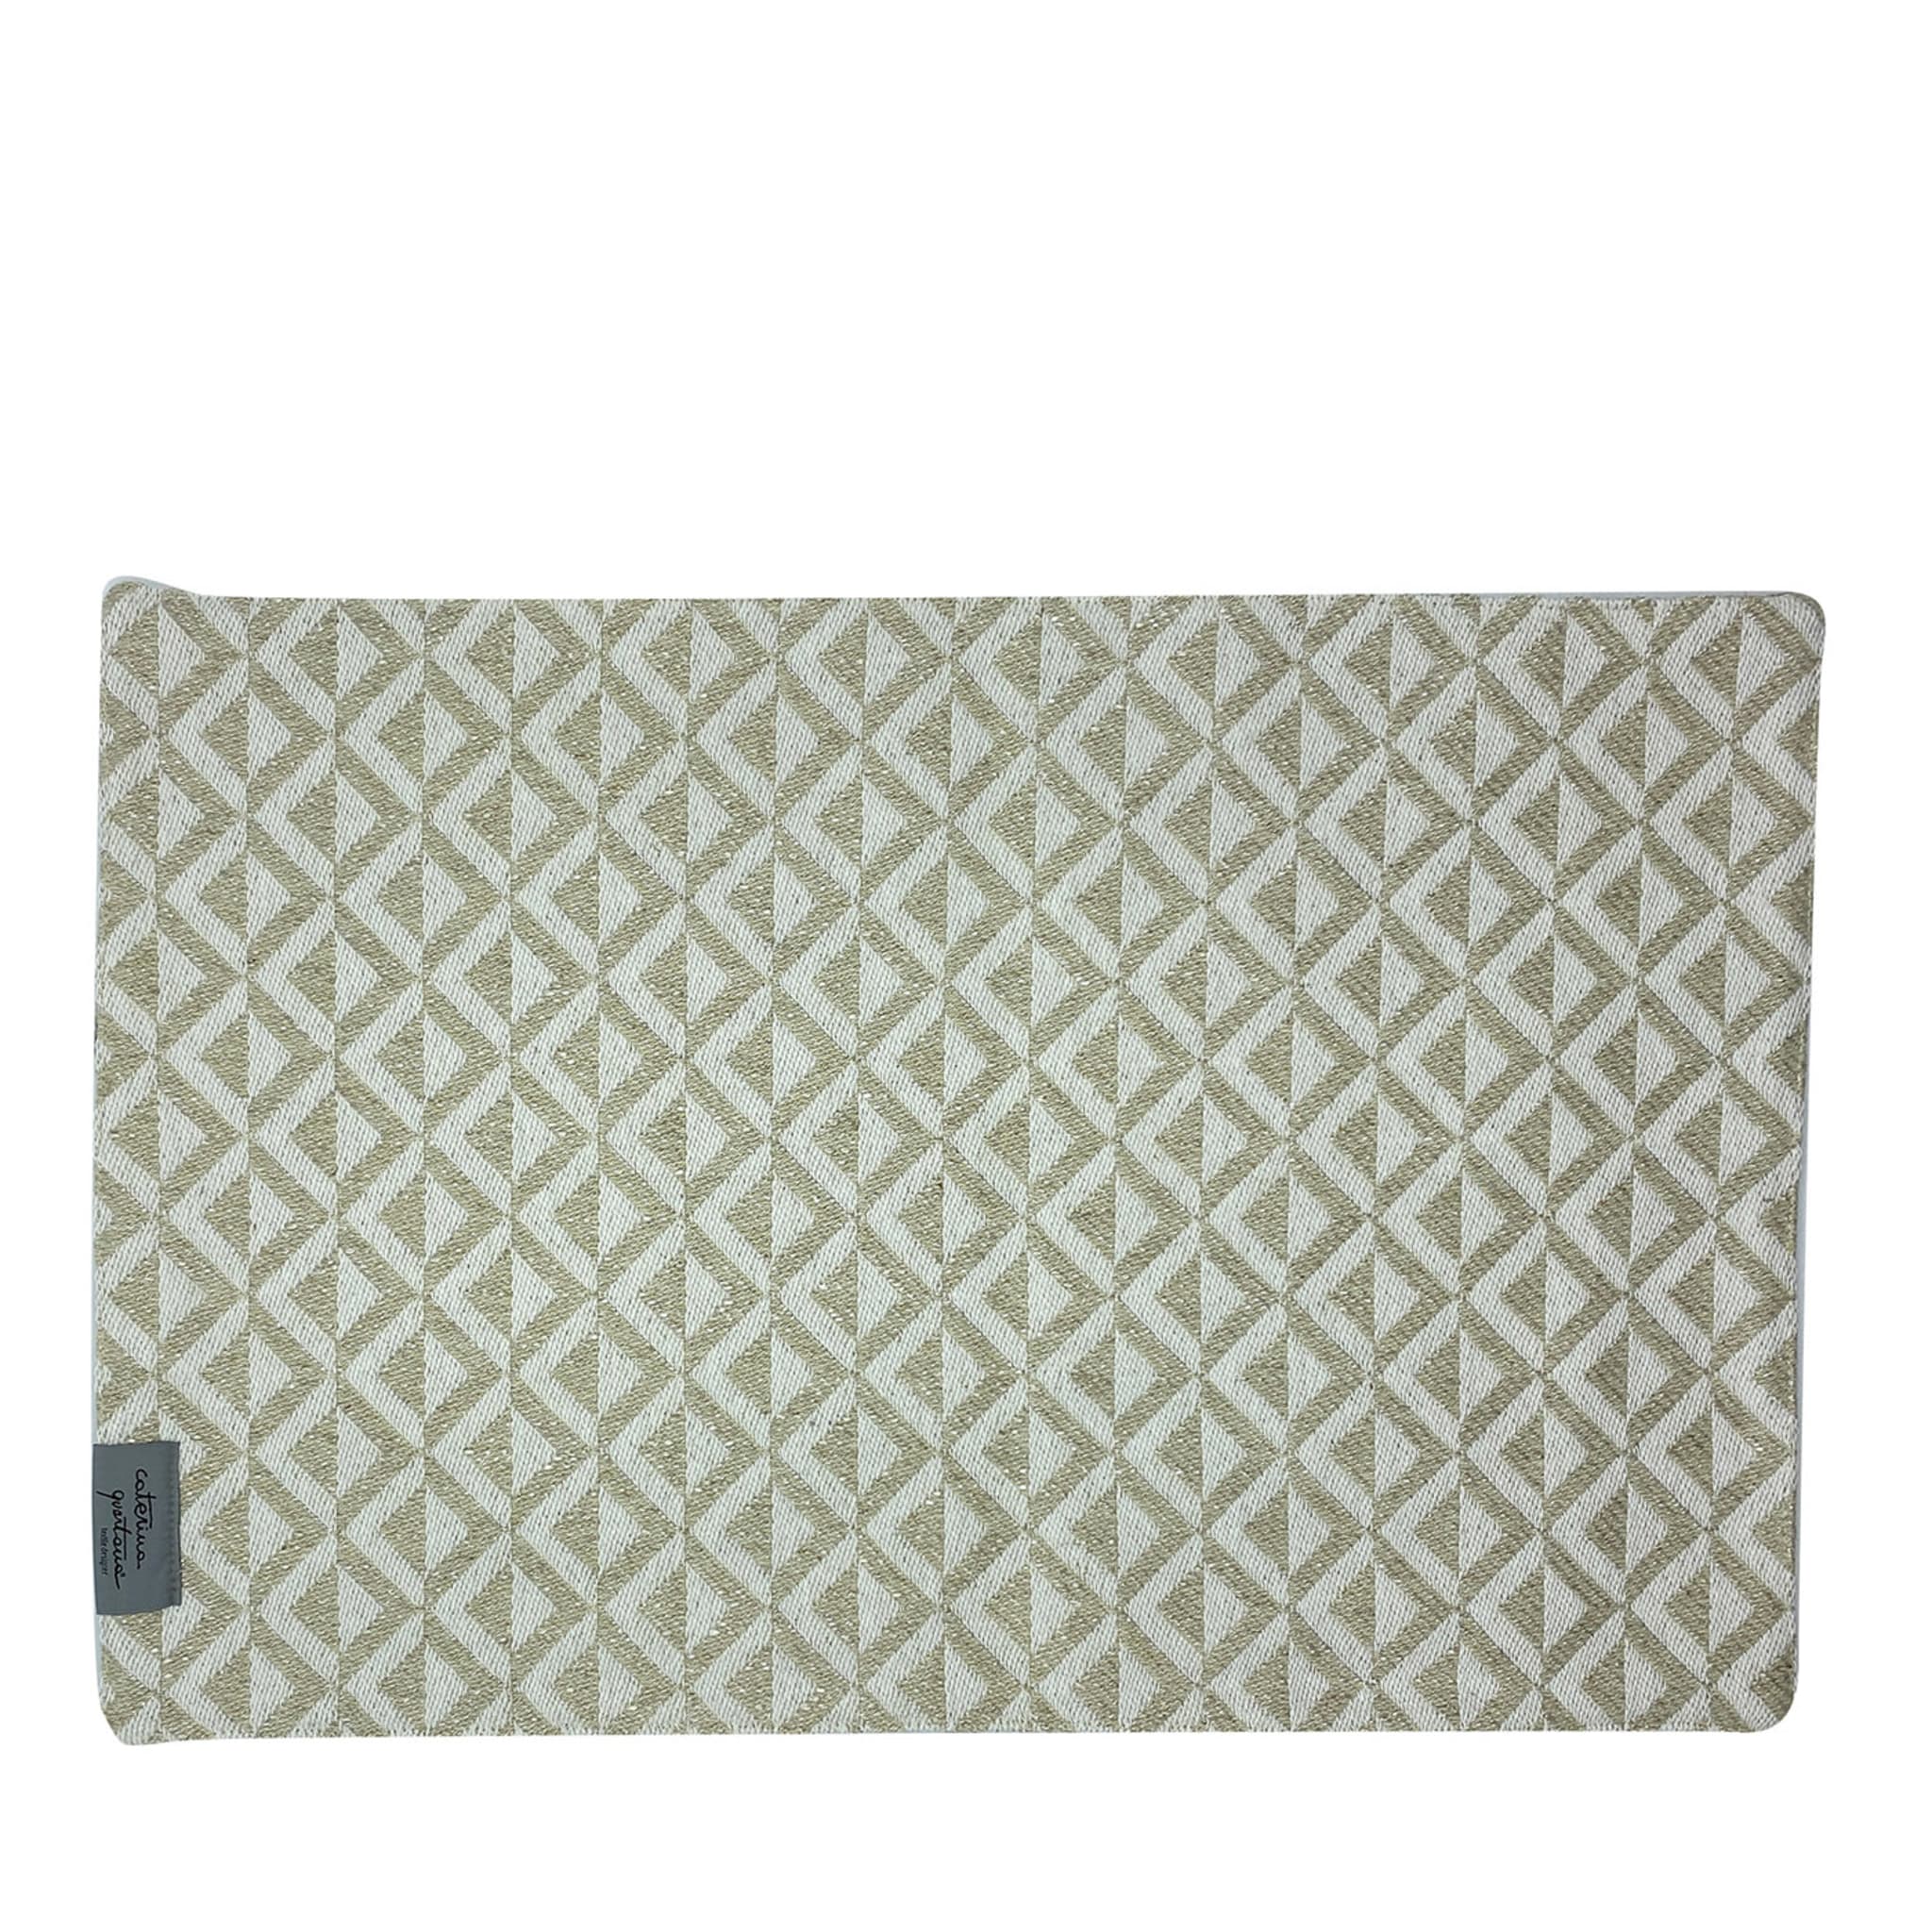 Losanghe Patterned Set of 2 Off-White&Ecru Placemats - Main view